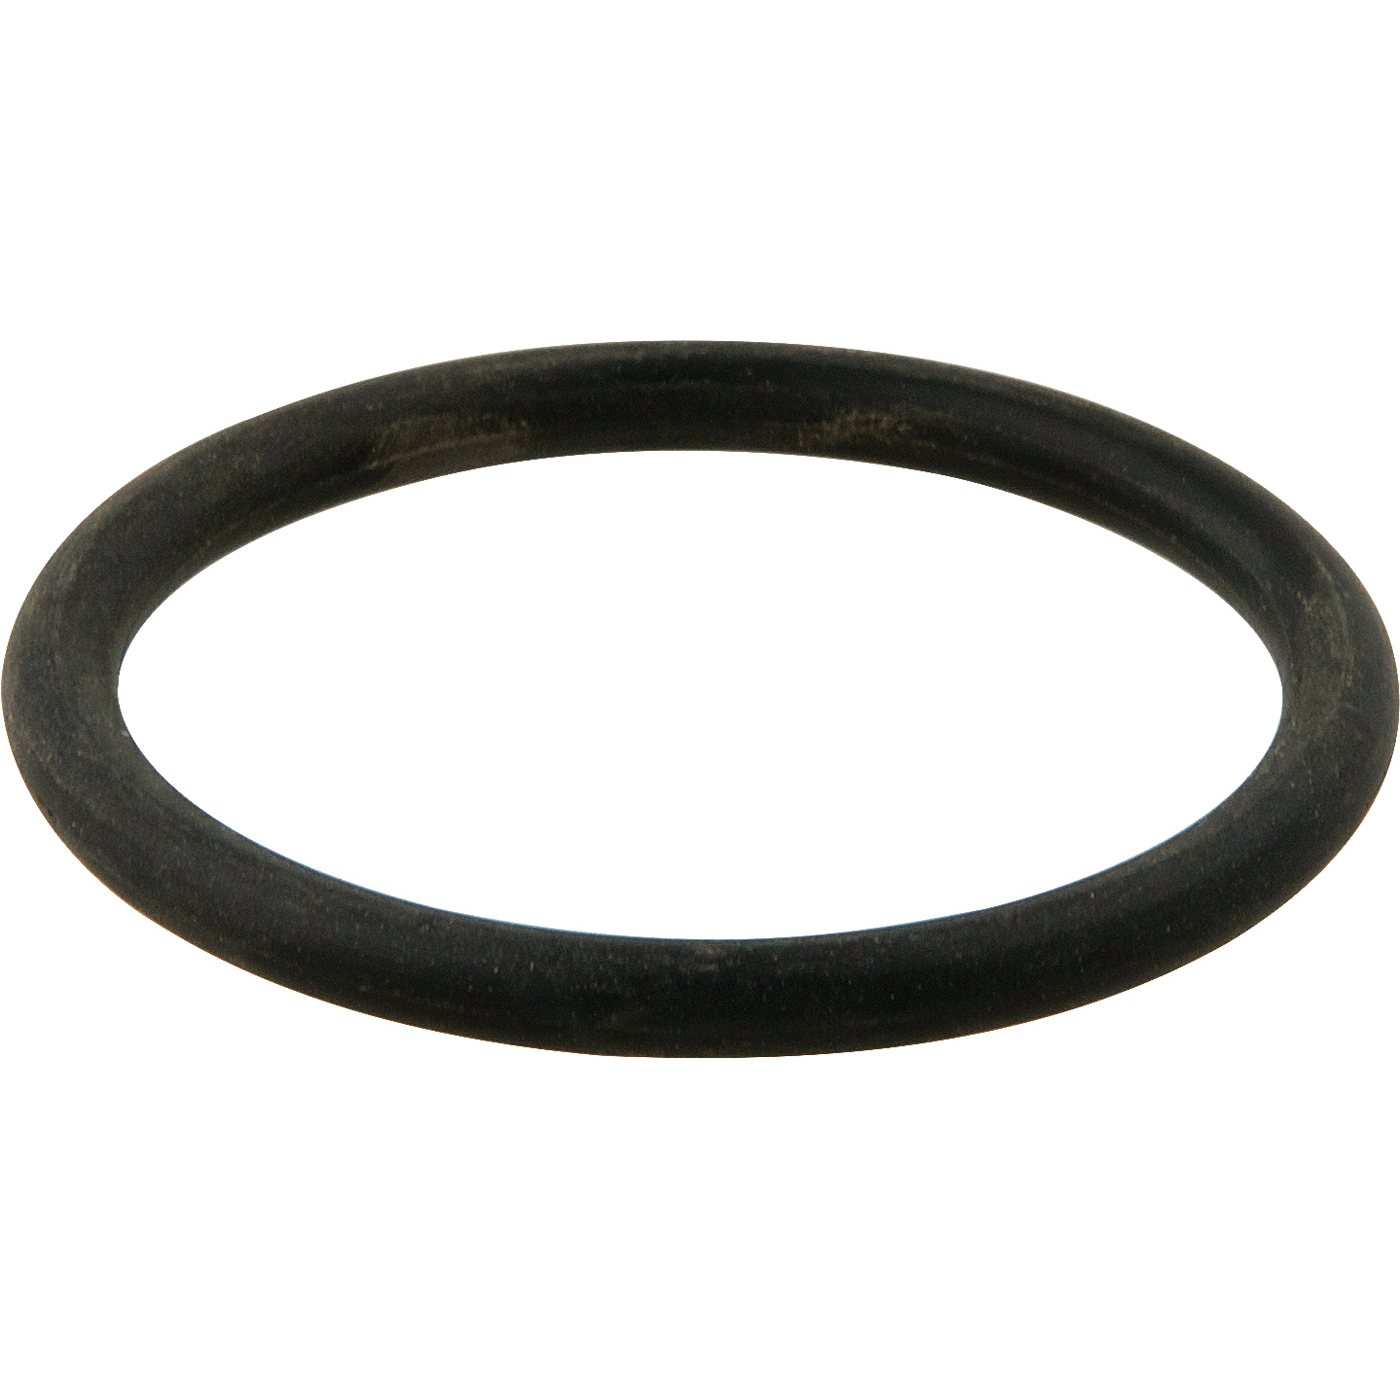 O-ring - 1-3/8 ID x 1-5/8 OD x 1/8 thick - Master Plumber®